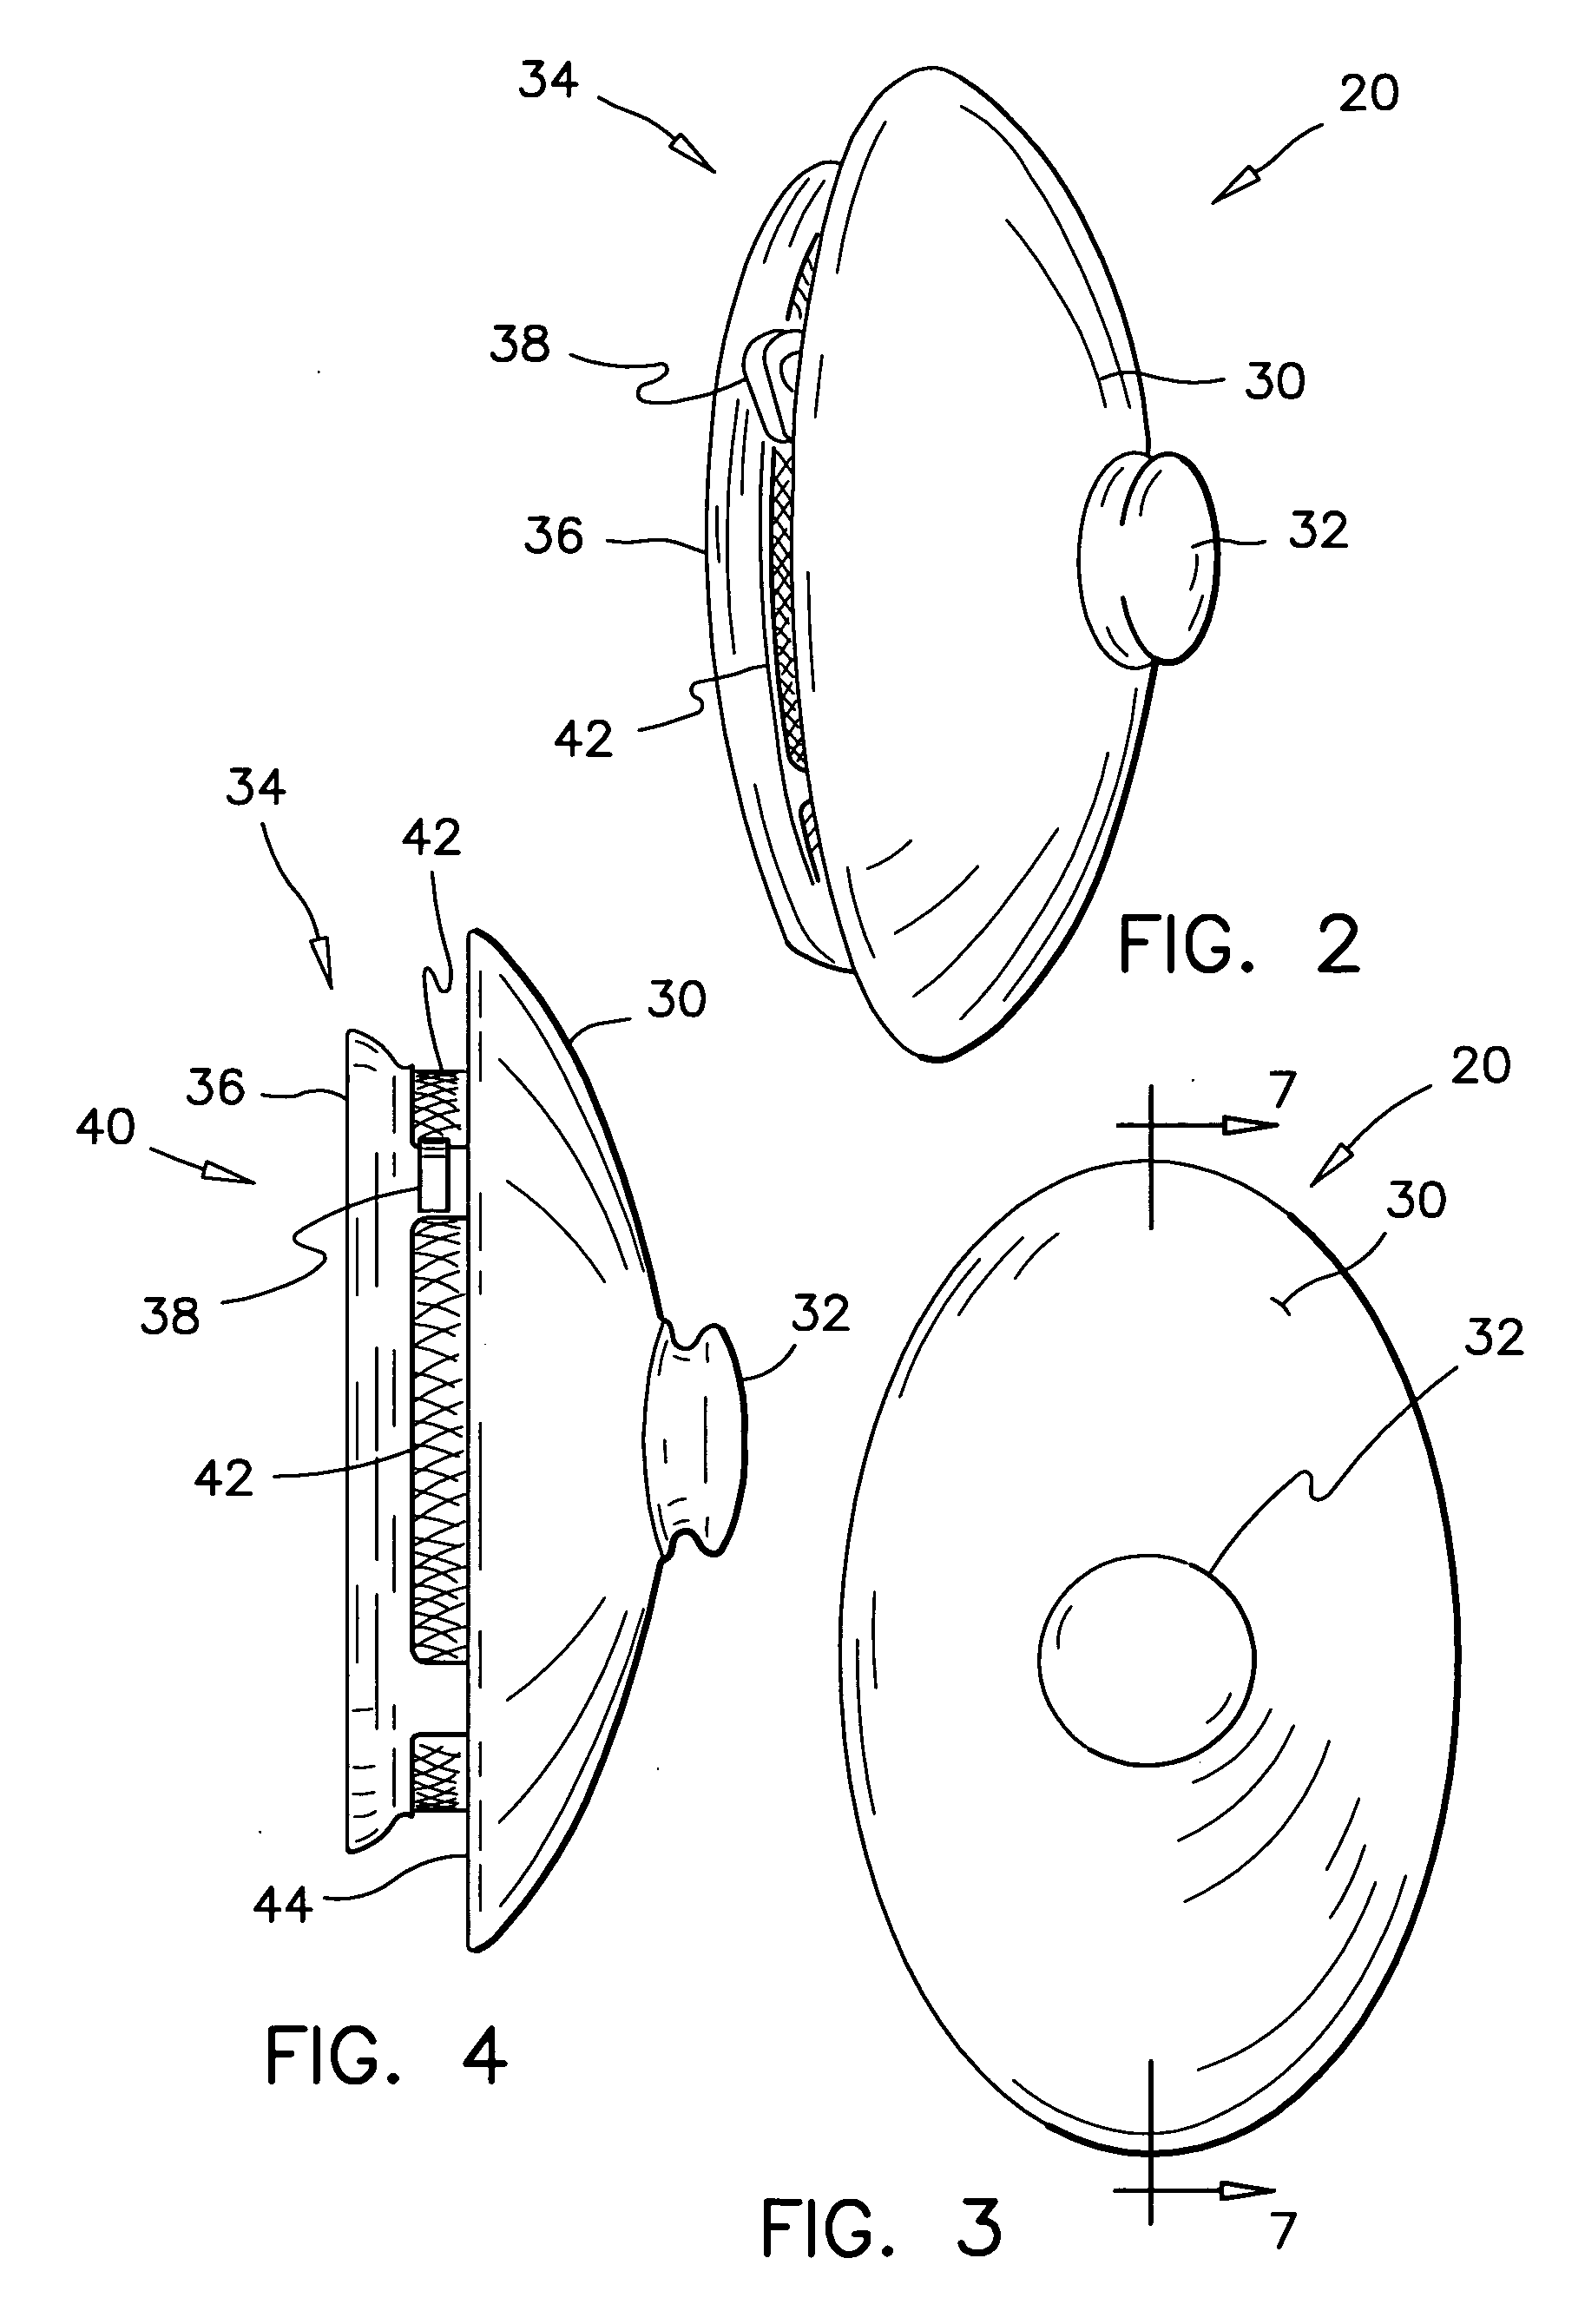 Cough catcher with protection against germ transmission by hand contact